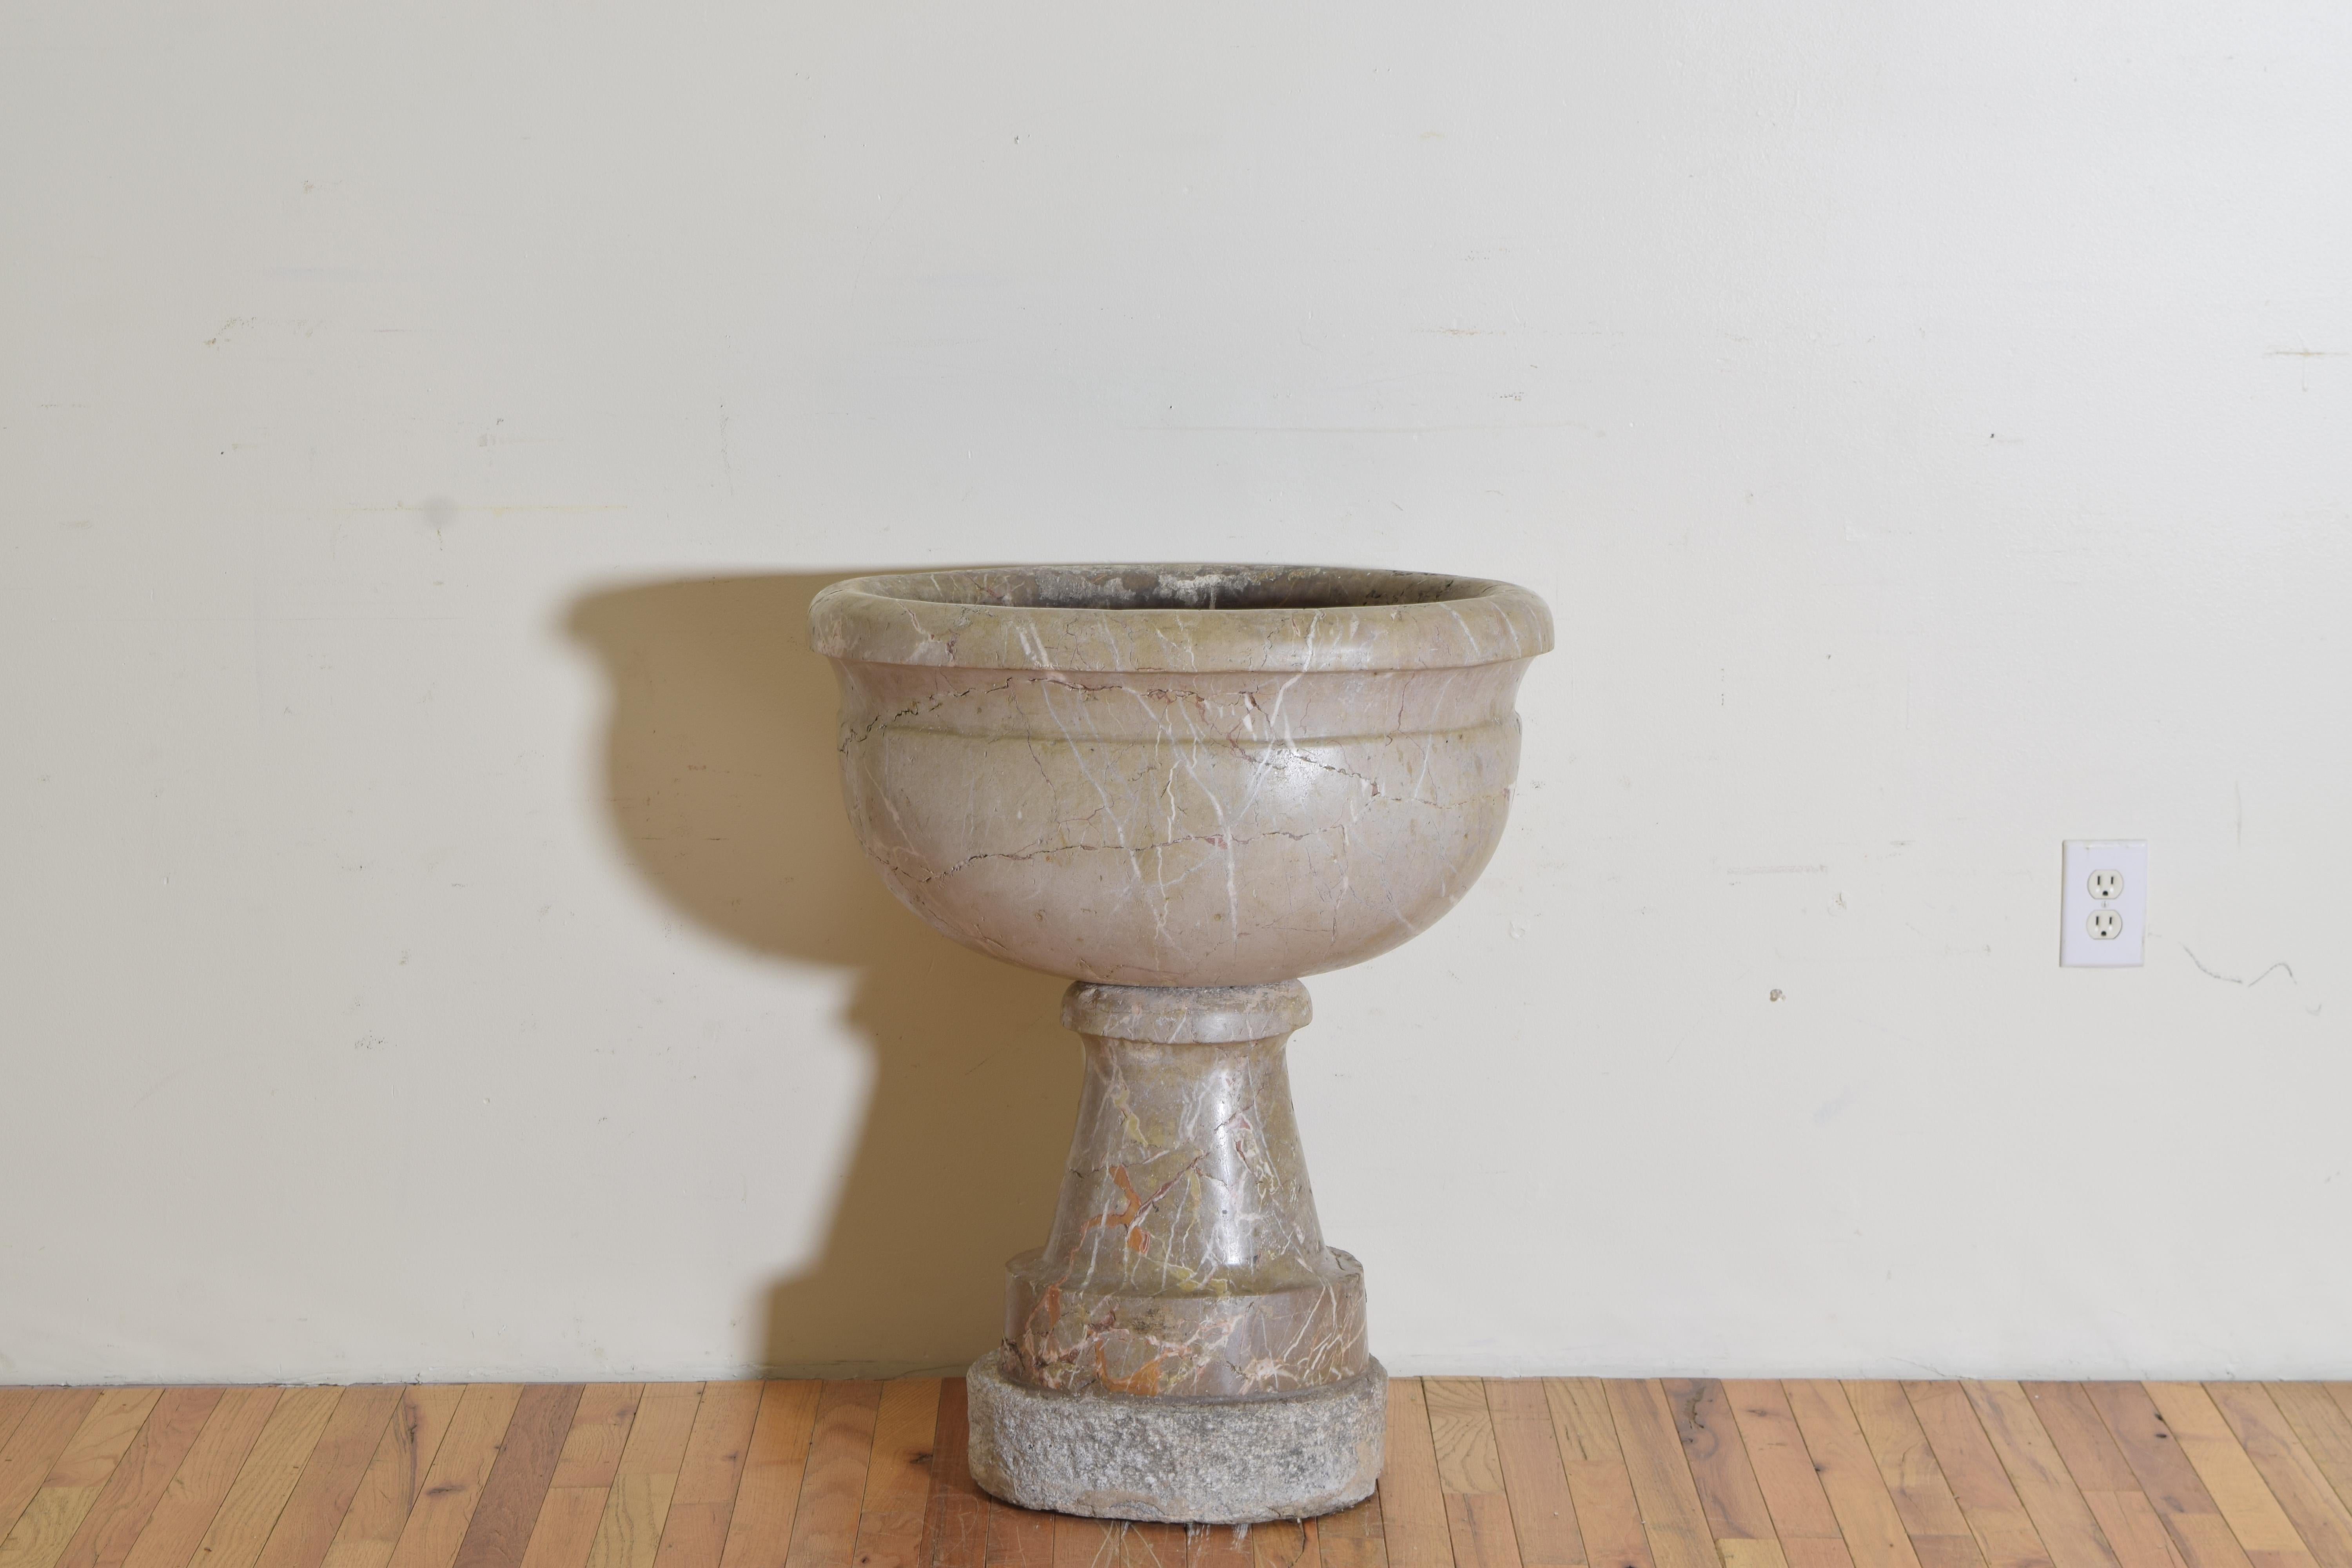 Of two piece construction, the bowl with rounded top edge and drain located at rear of bottom, the plinth form base raised on a cement slab, the rear of the base concave.